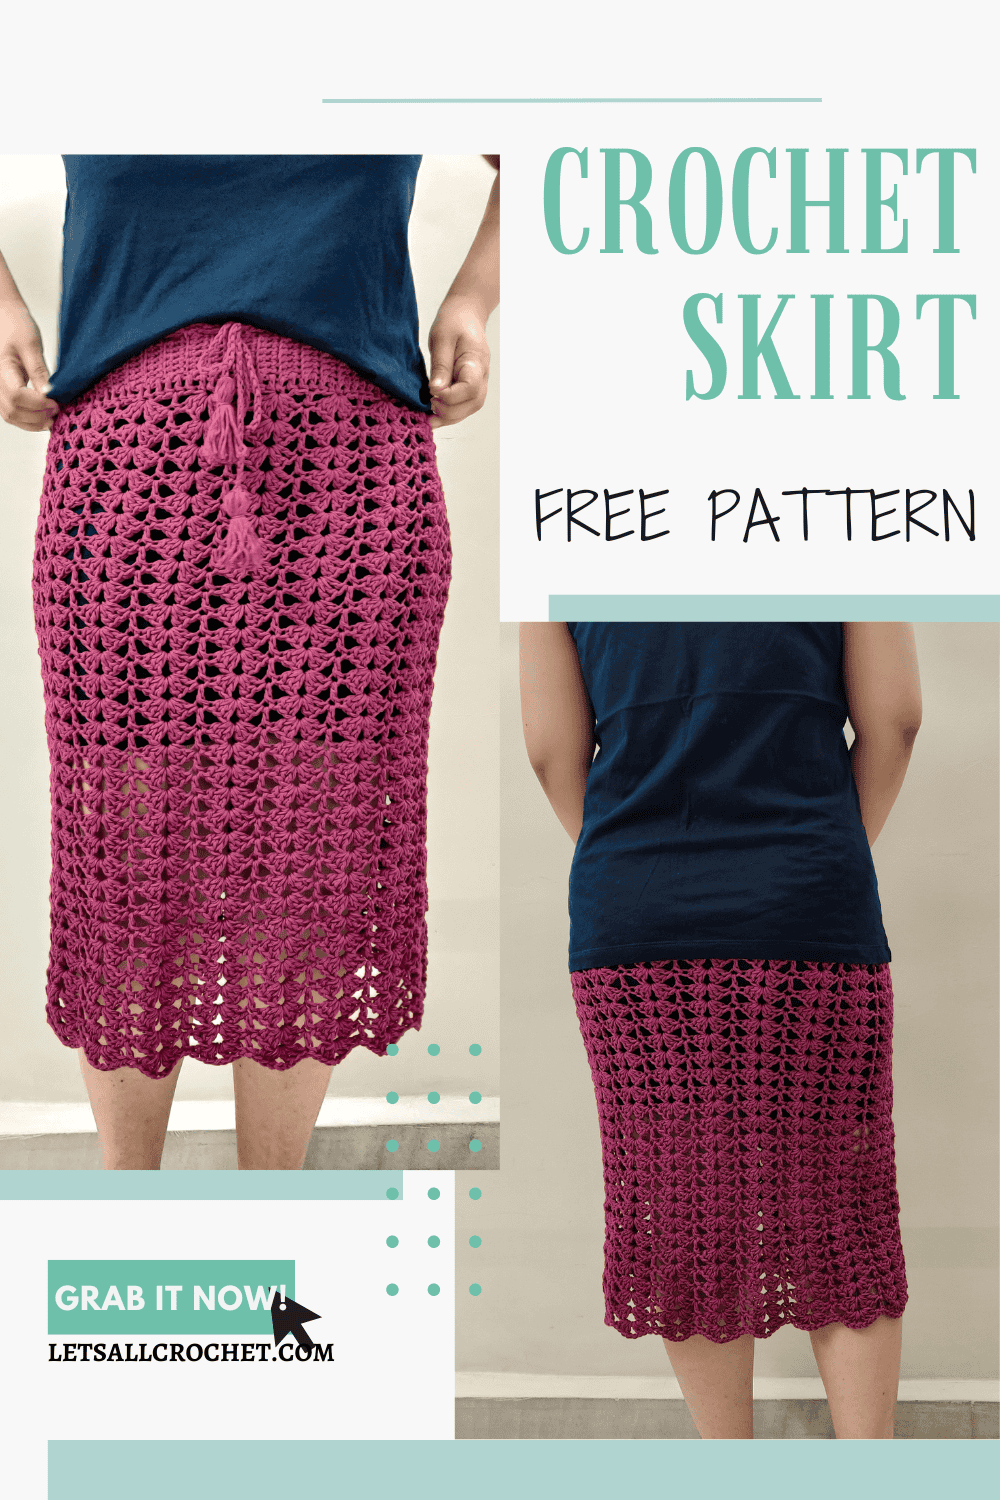 the weekend skirt front and back view with the text overlay crochet skirt free pattern